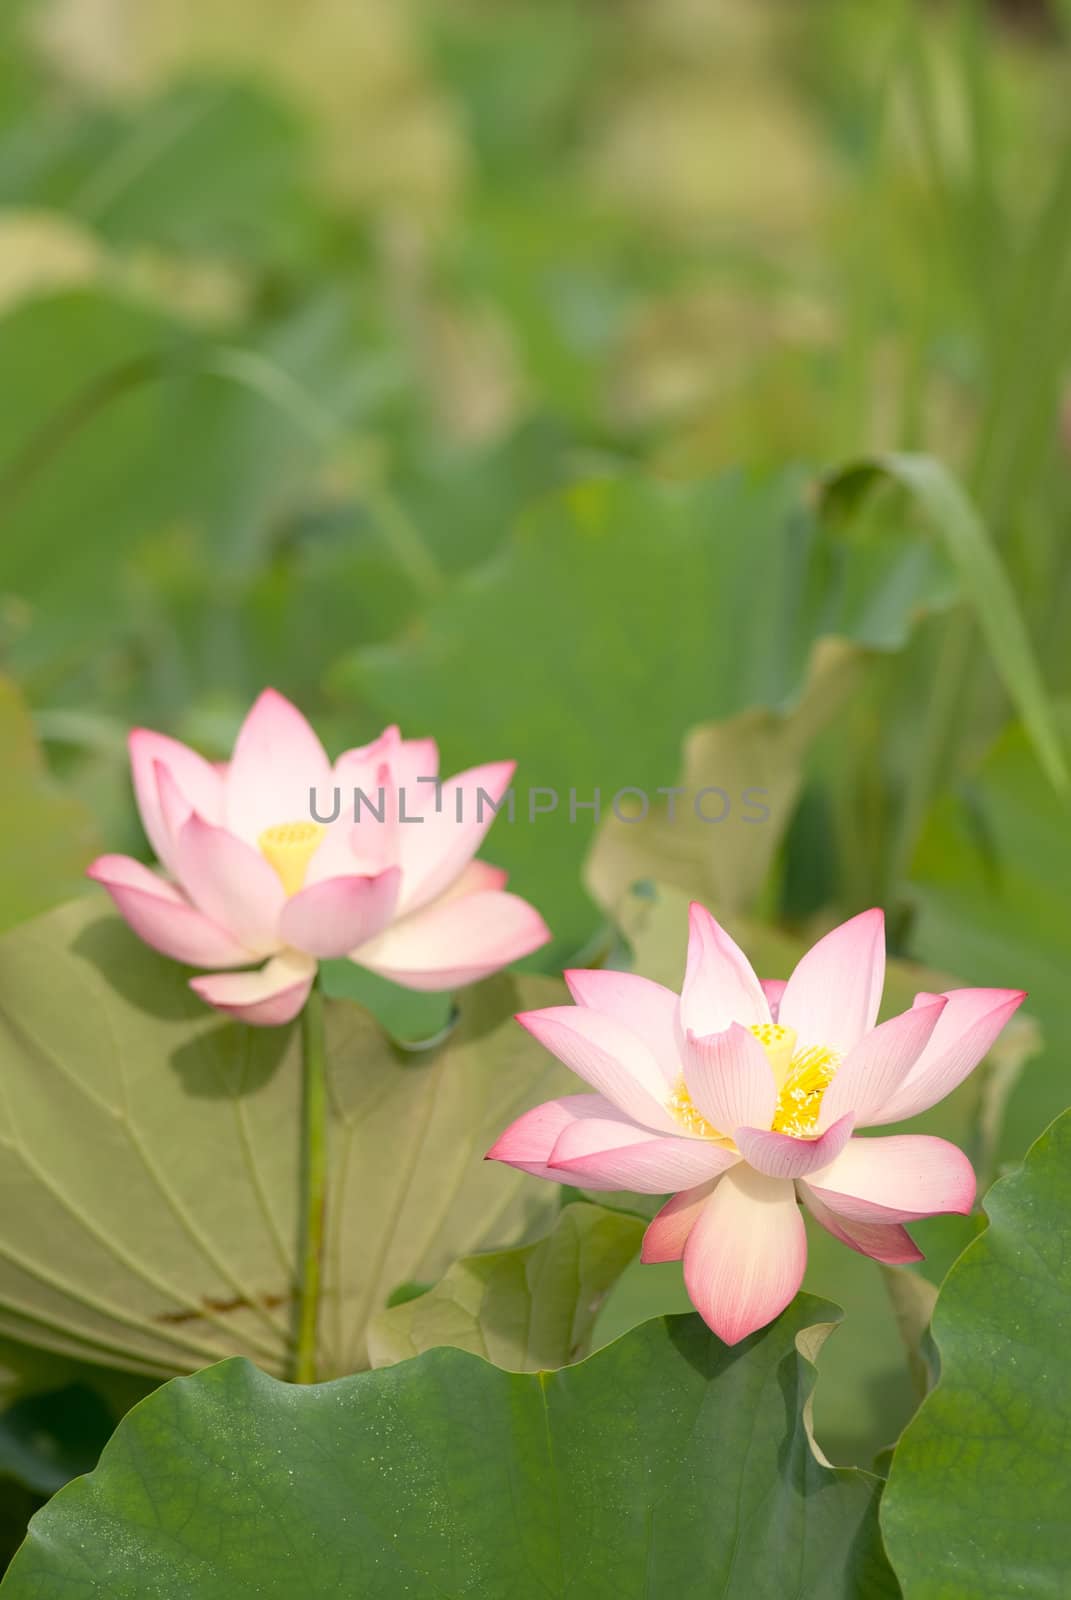 Two lotus flowers in farm in outdoor.